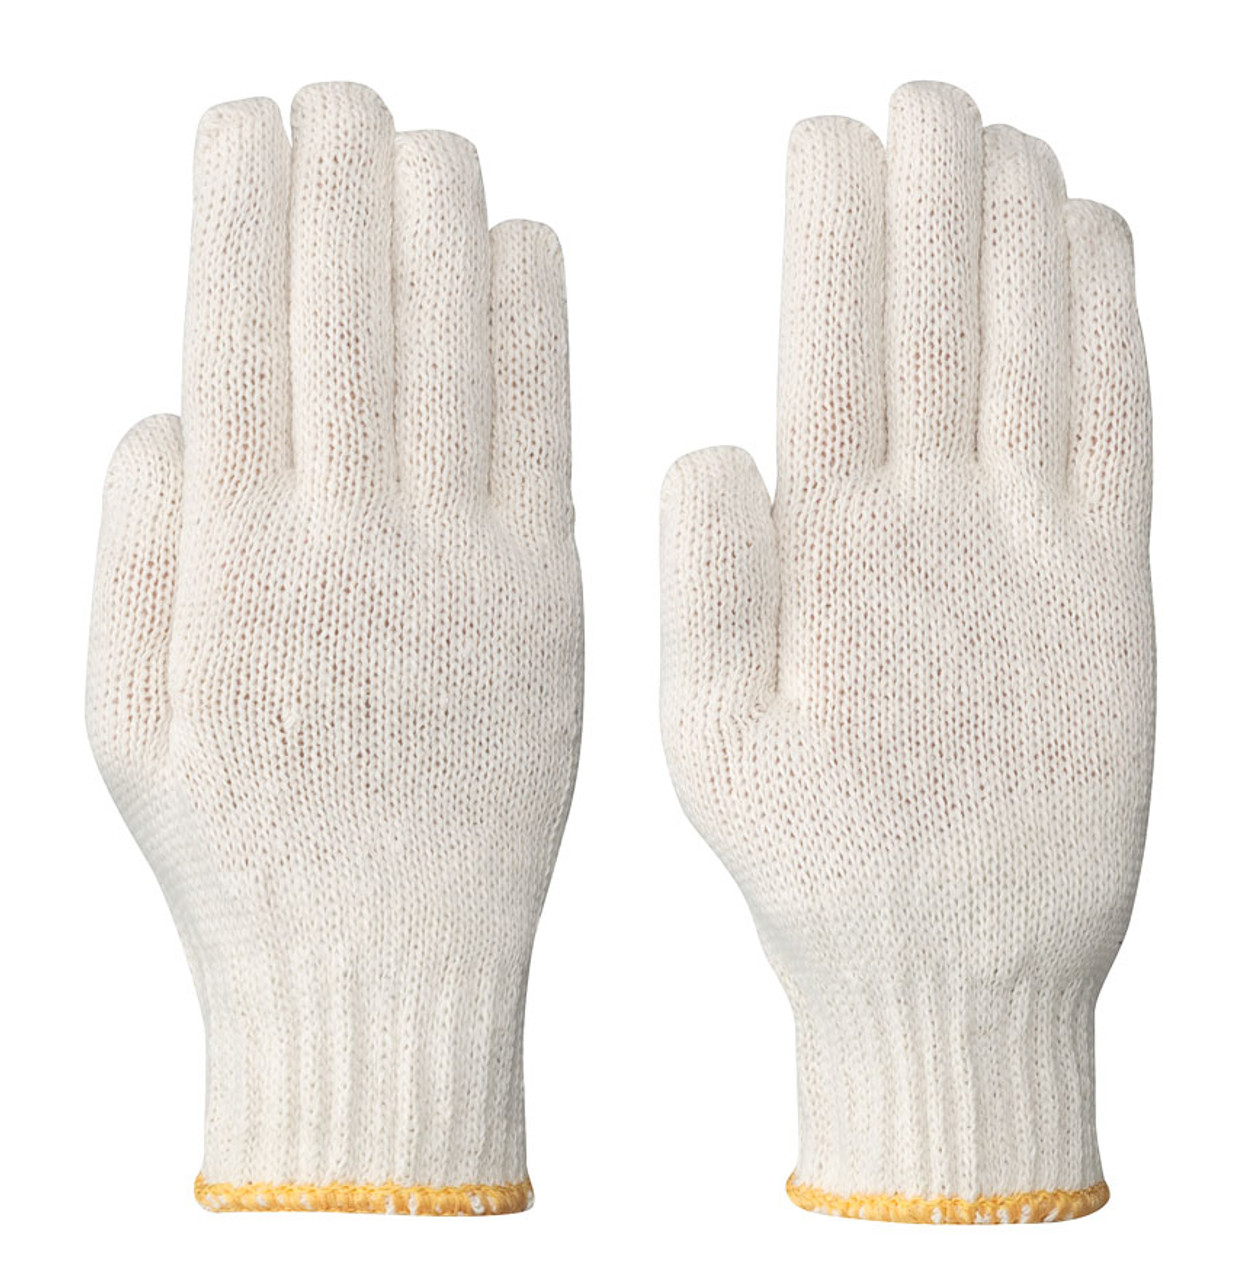 Knitted Poly/Cotton Glove Liner, Natural